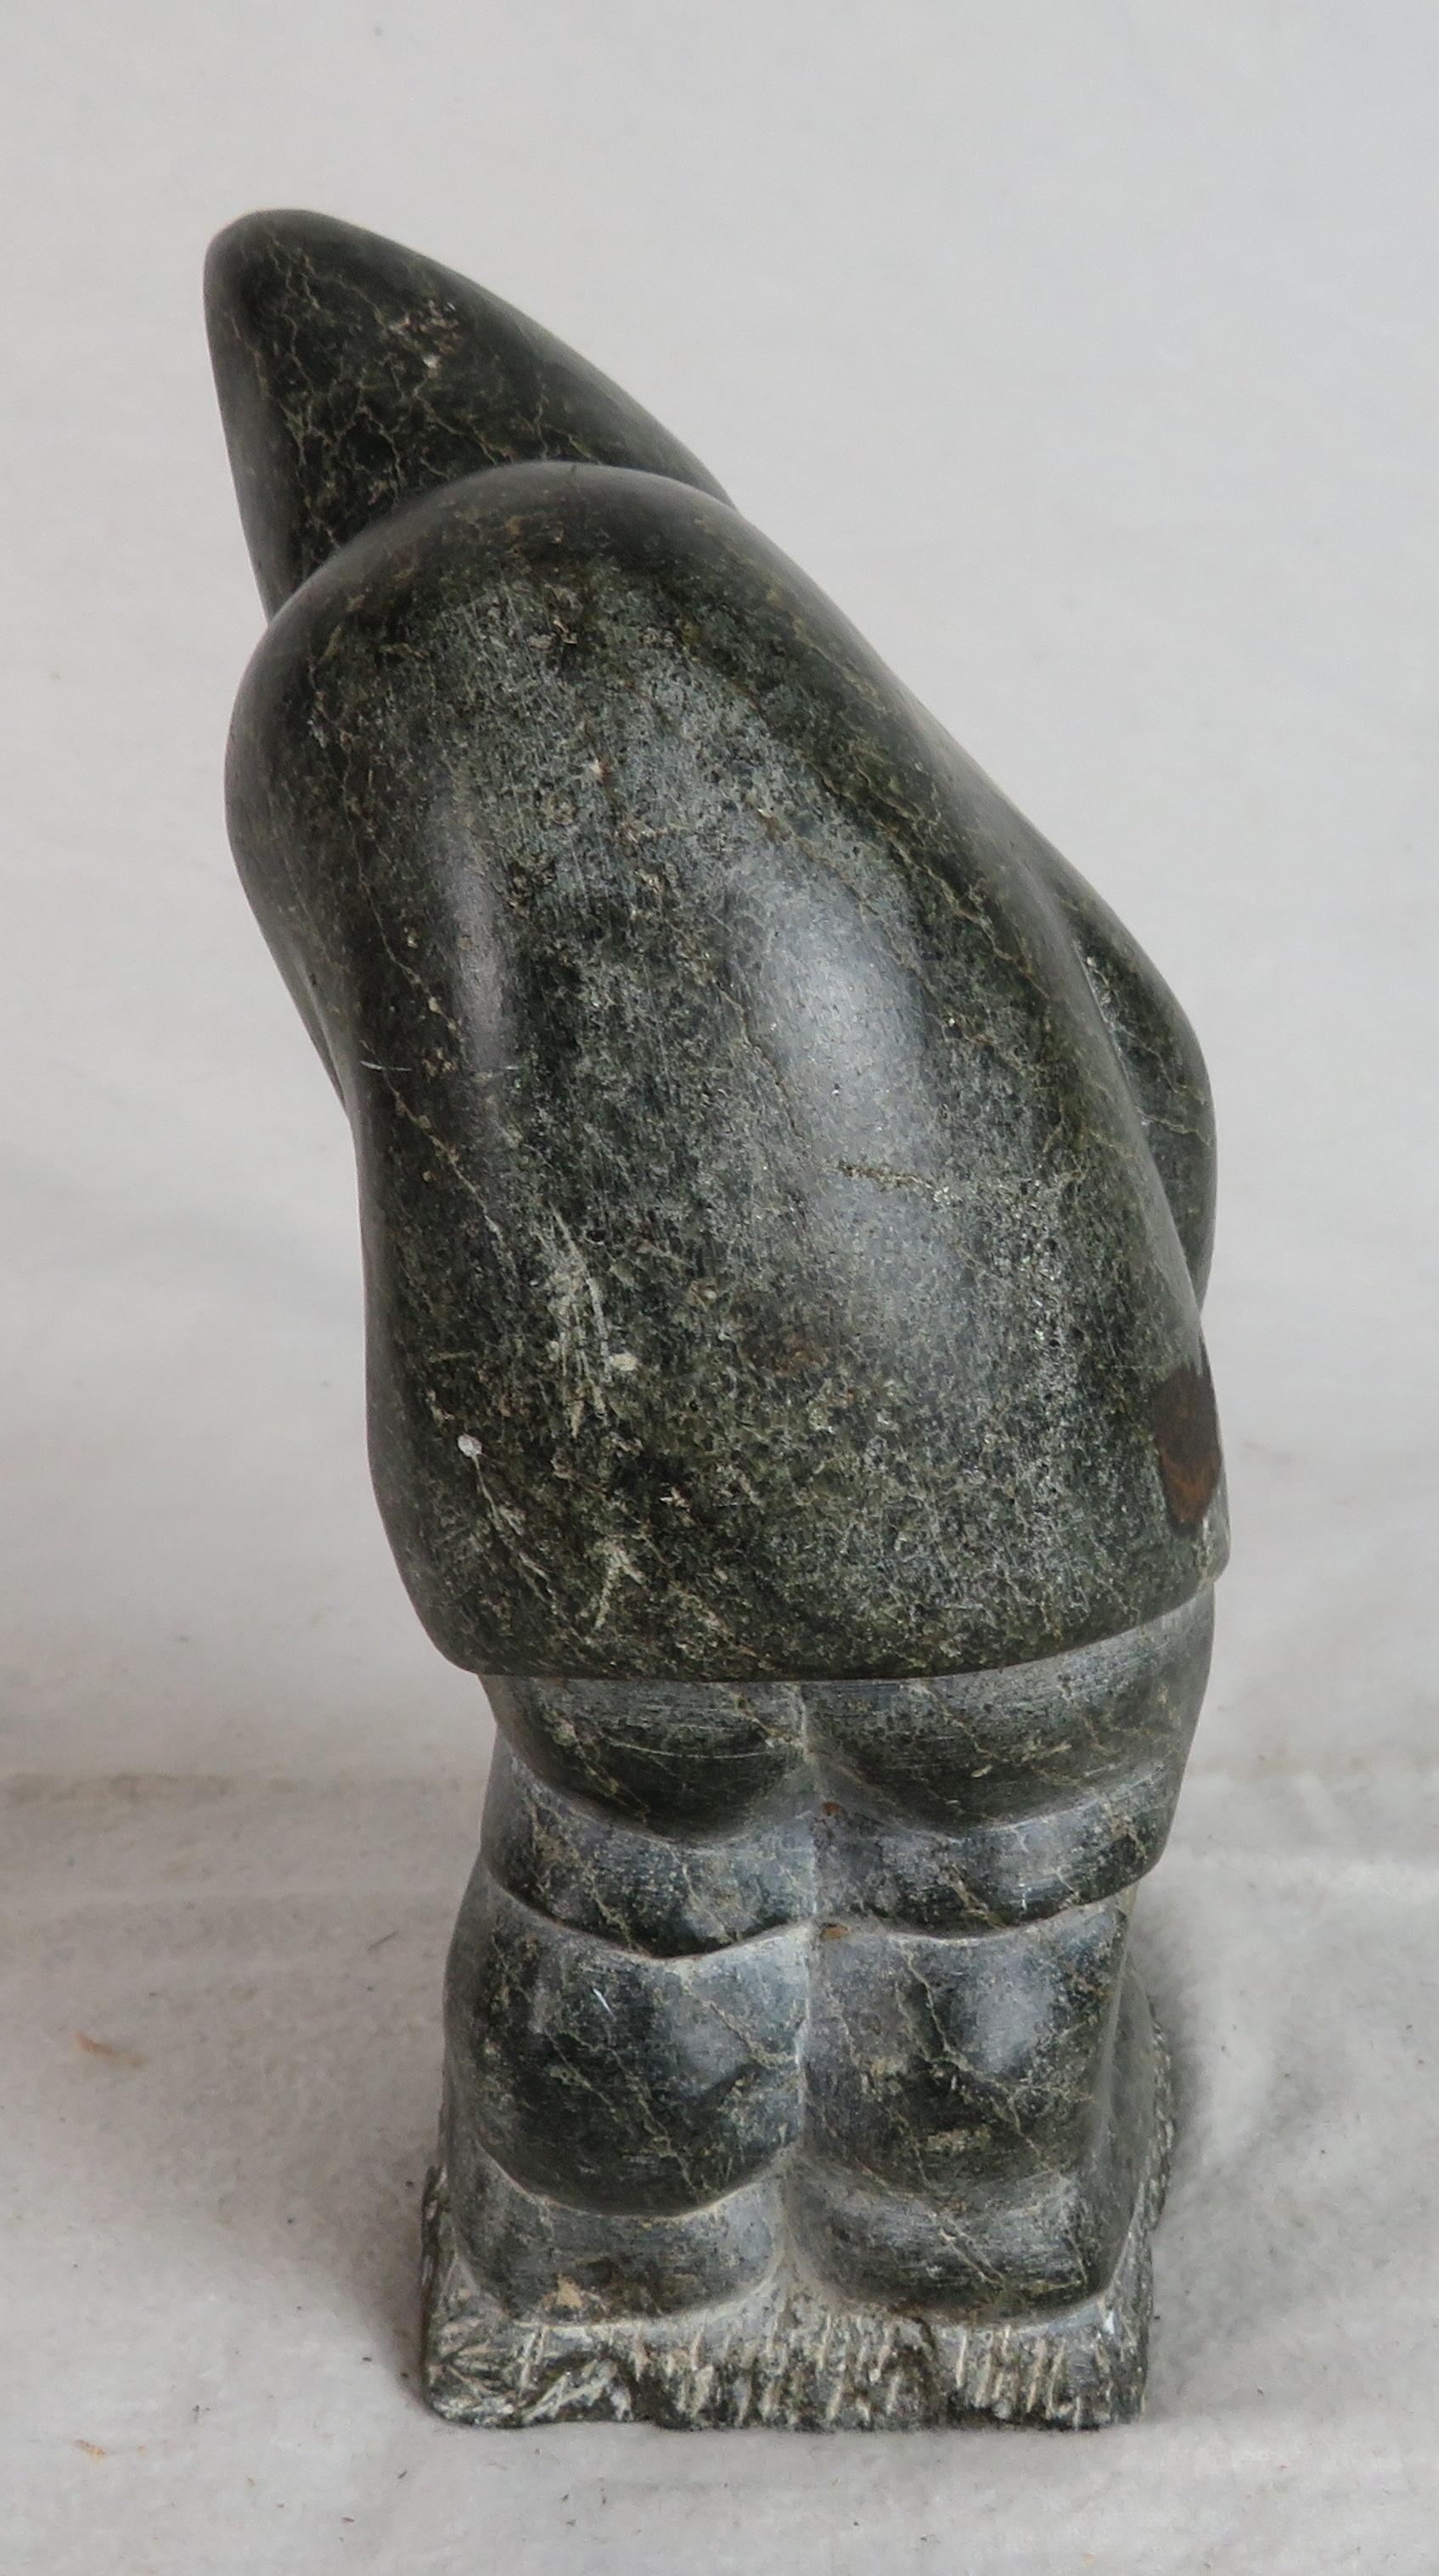 Hand-Carved Carved Soapstone Sculpture of an Inuit Leaning Forward, Holding Bag at Feet For Sale